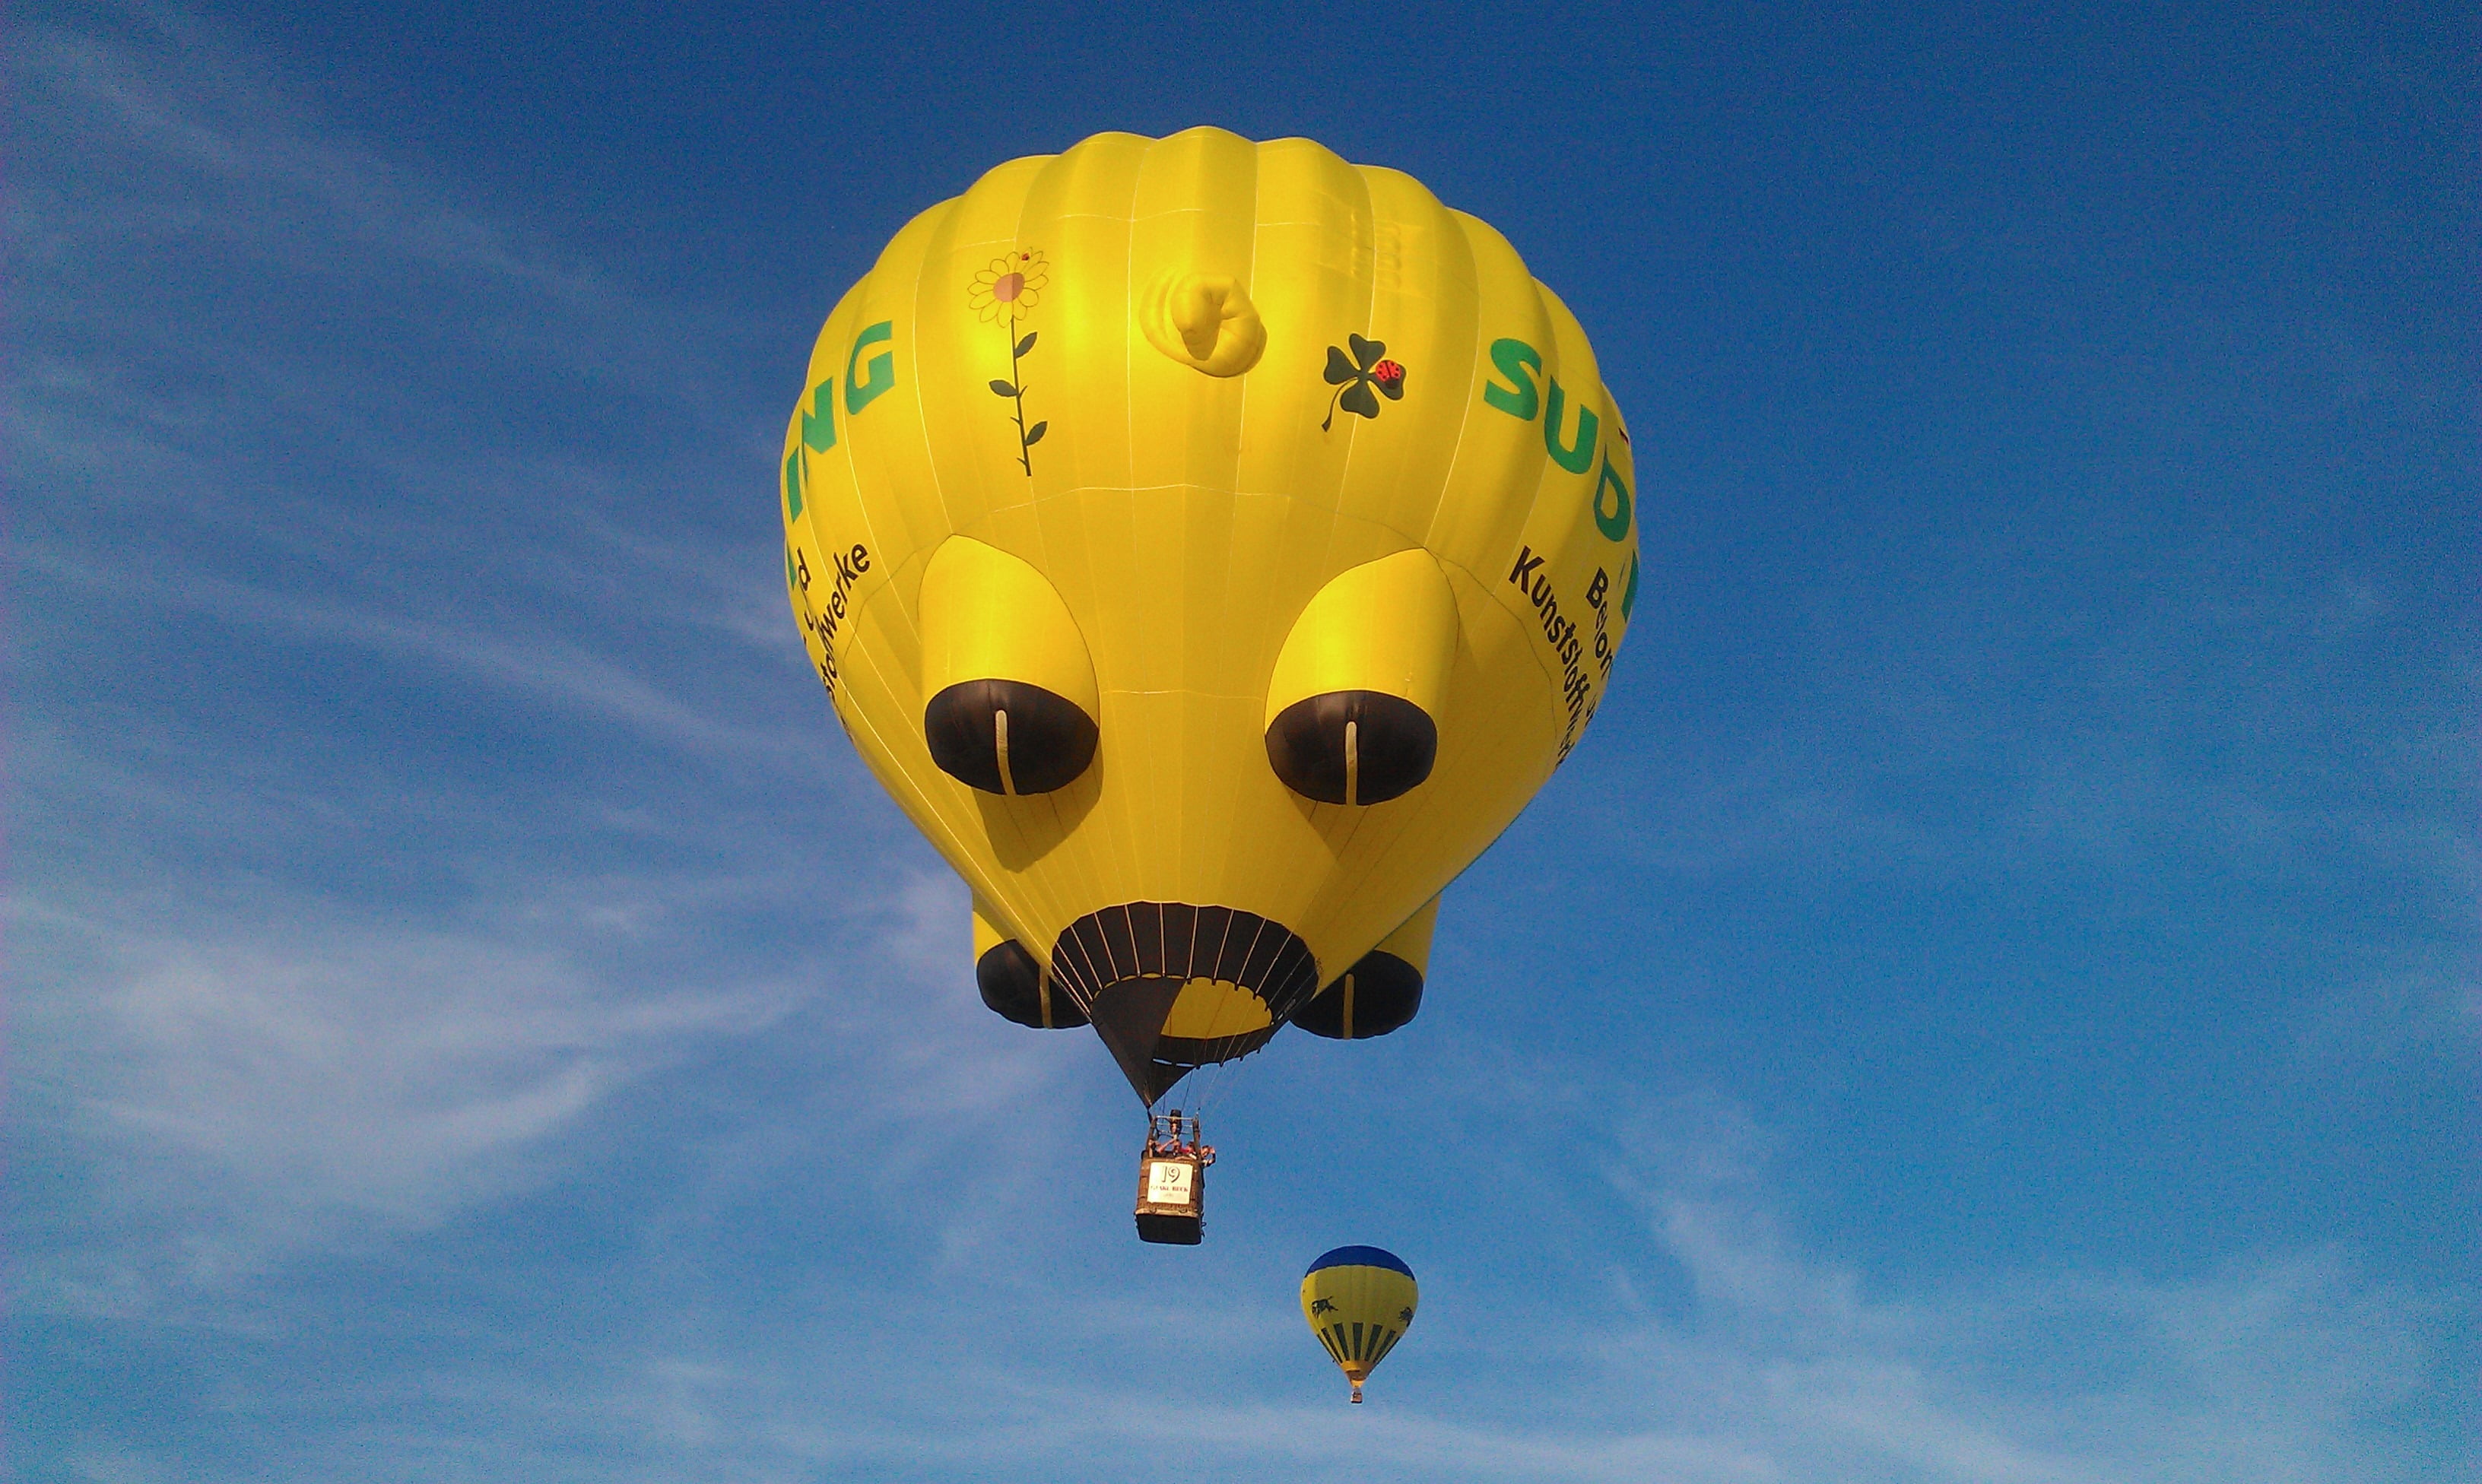 yellow hot air balloon during day time